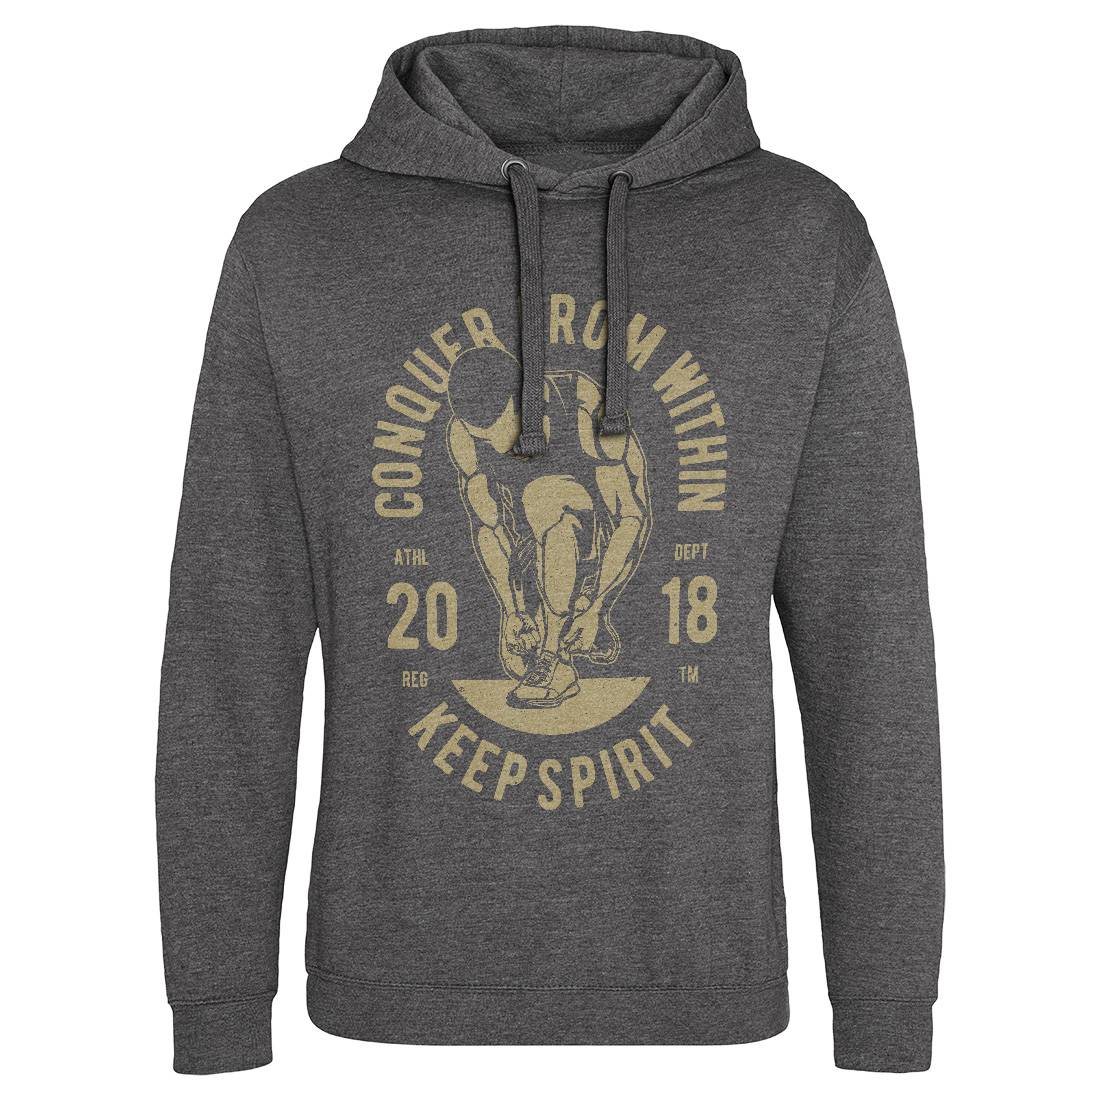 Conquer From Within Mens Hoodie Without Pocket Sport A638